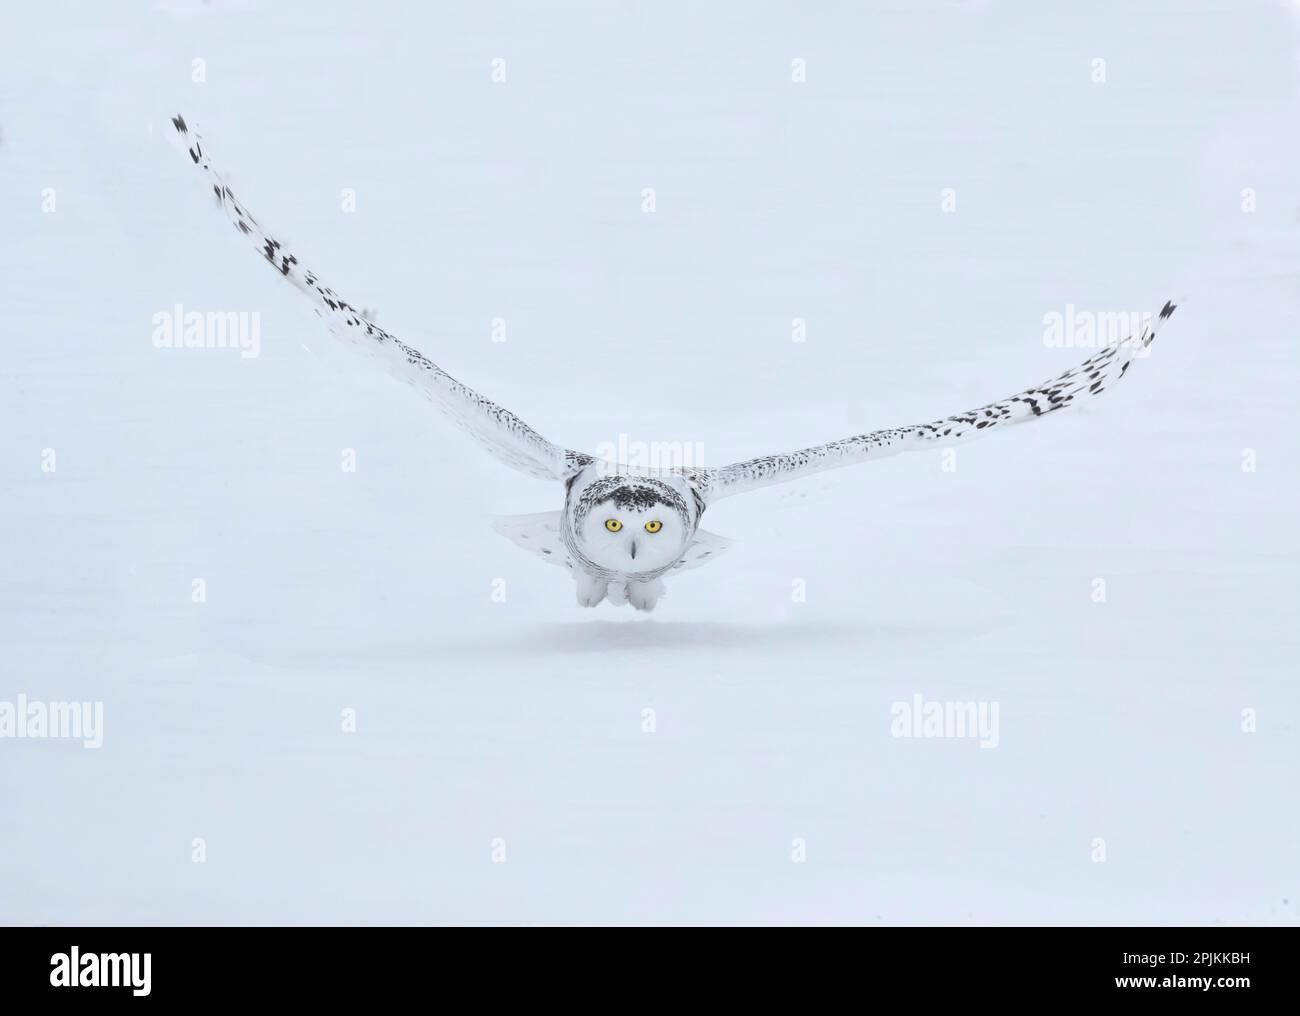 Canada, Ontario, Barrie. Female snowy owl in flight over snow. Stock Photo